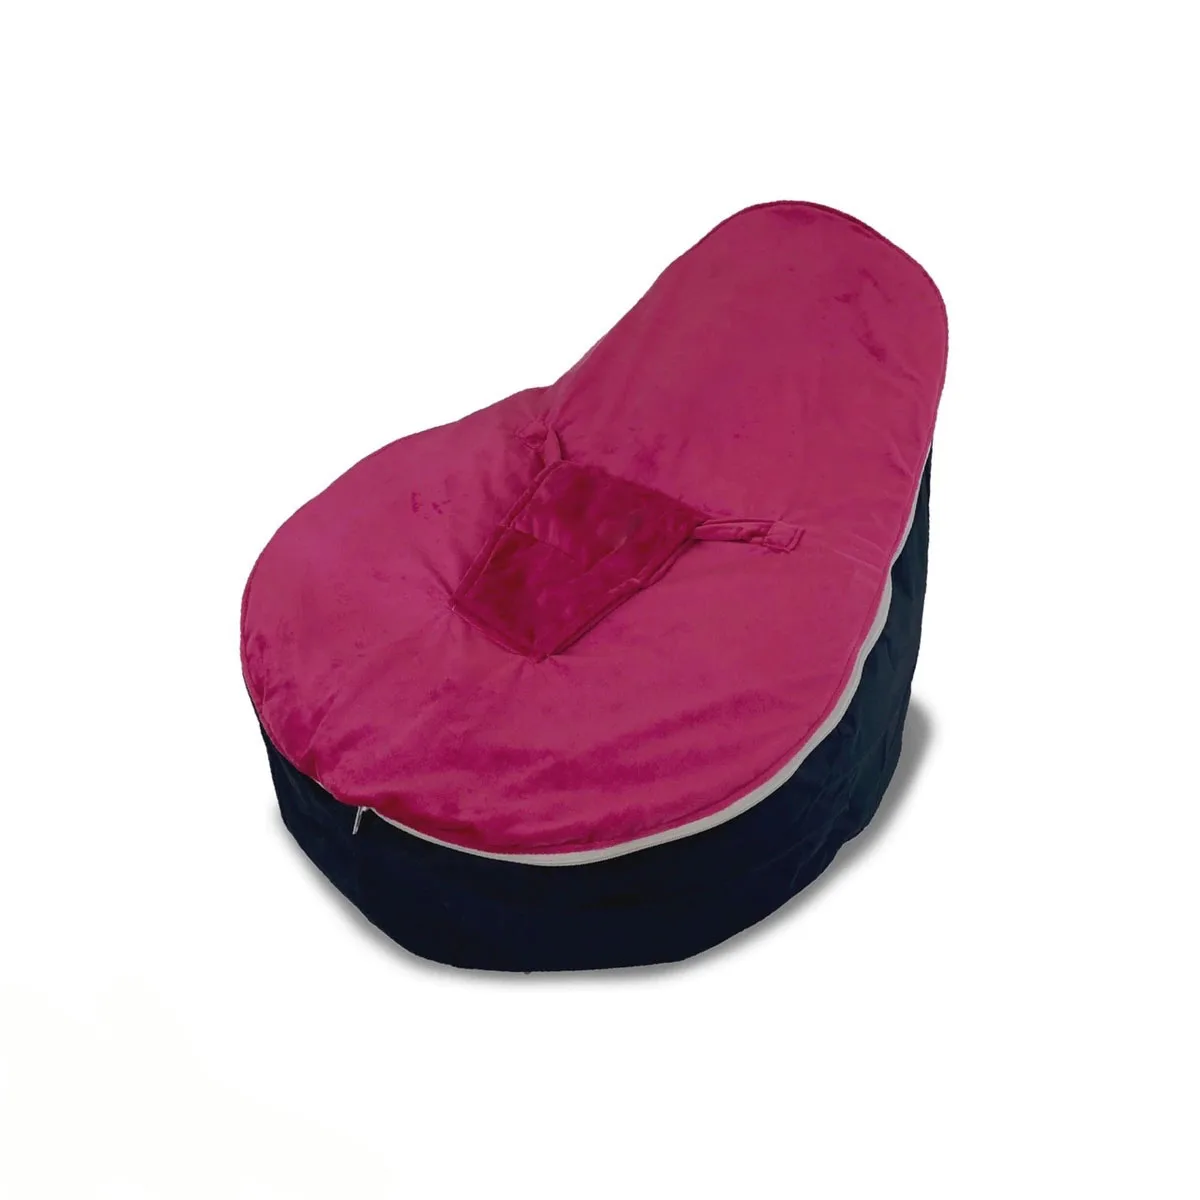 Hot Sell Soft Newborn Baby Bed Baby Bean Bag For Sale Buy Baby Bean Bag Baby Beanbag Bean Bag Product On Alibaba Com